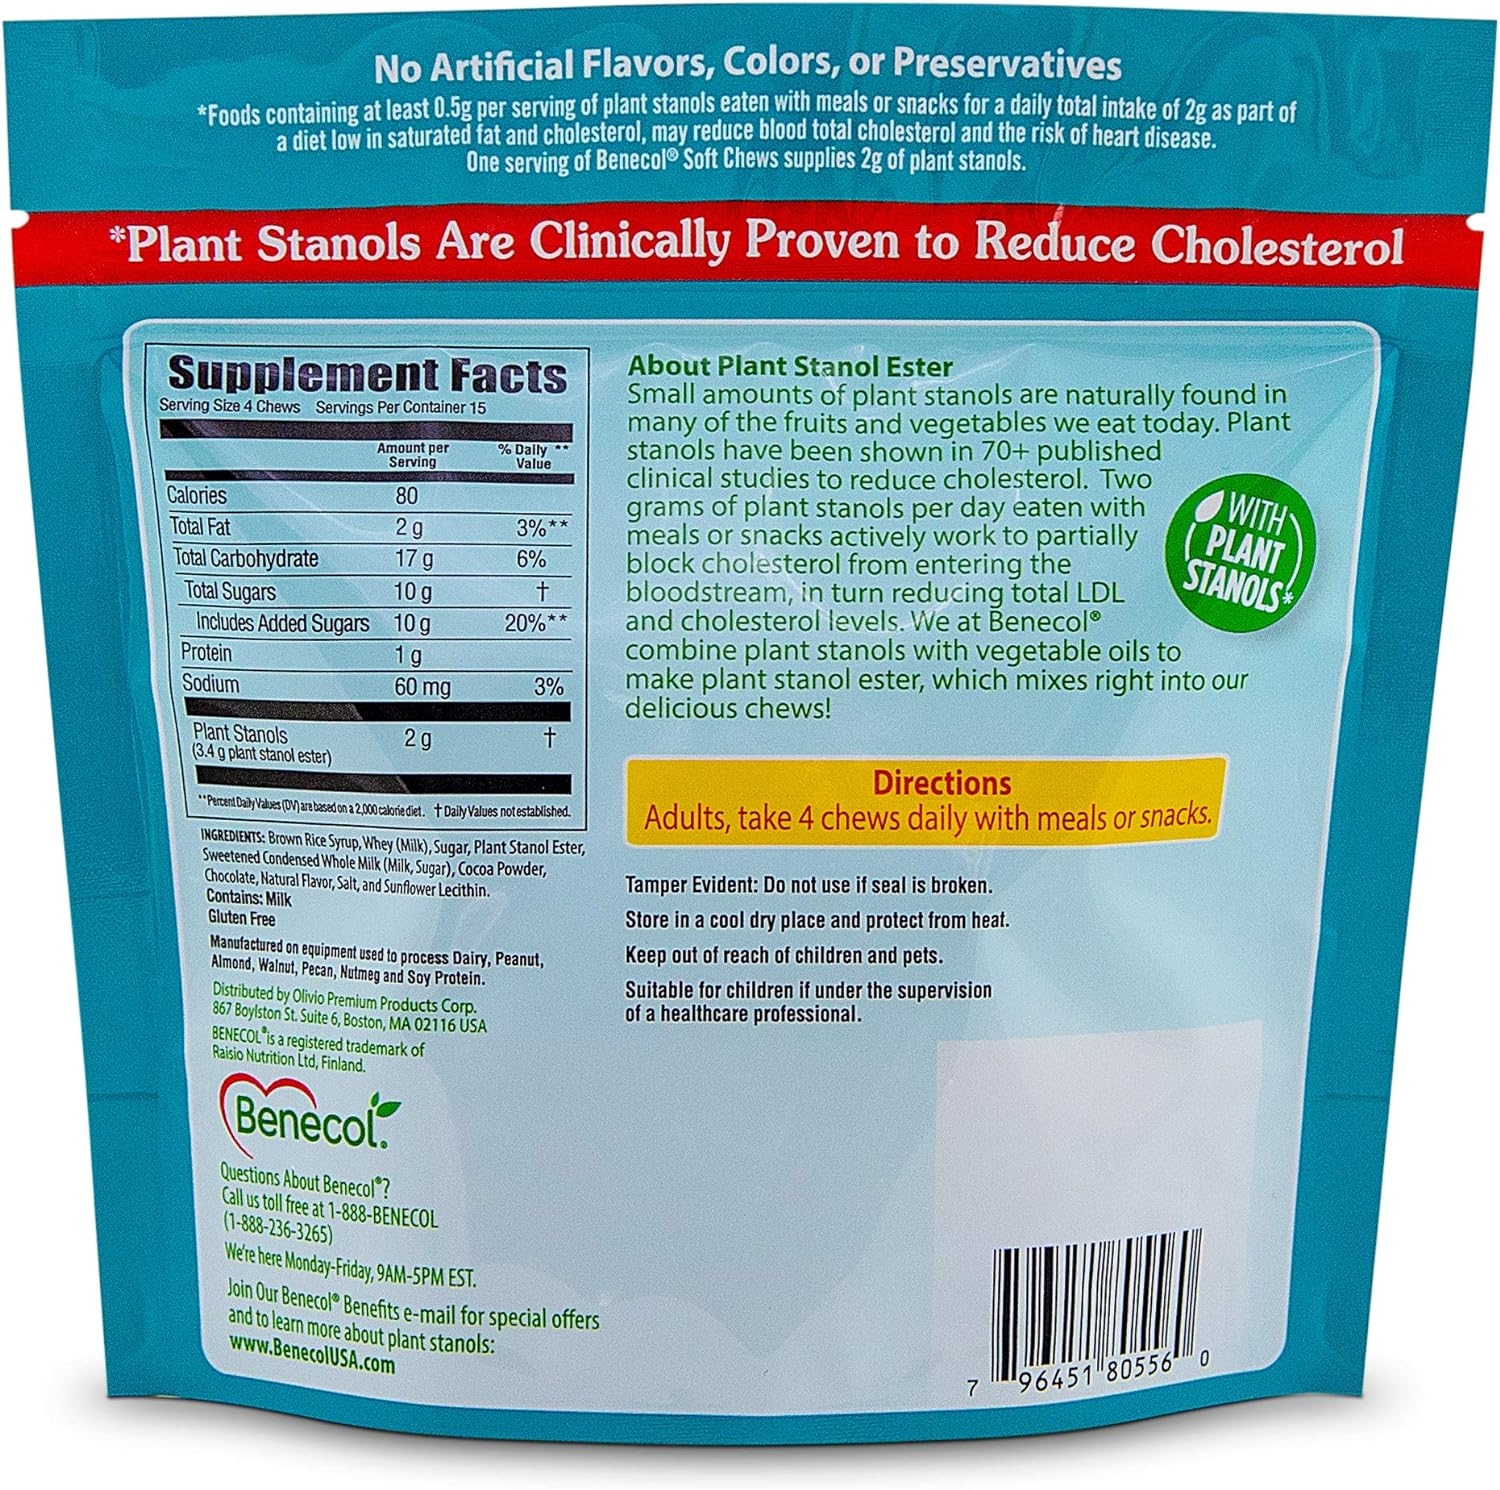 Benecol® Soft Chews - Dietary Supplement Made with Cholesterol-Lowering Plant Stanols, which are Clinically Proven to Reduce Total & LDL Cholesterol* (120 Chocolate Chews)